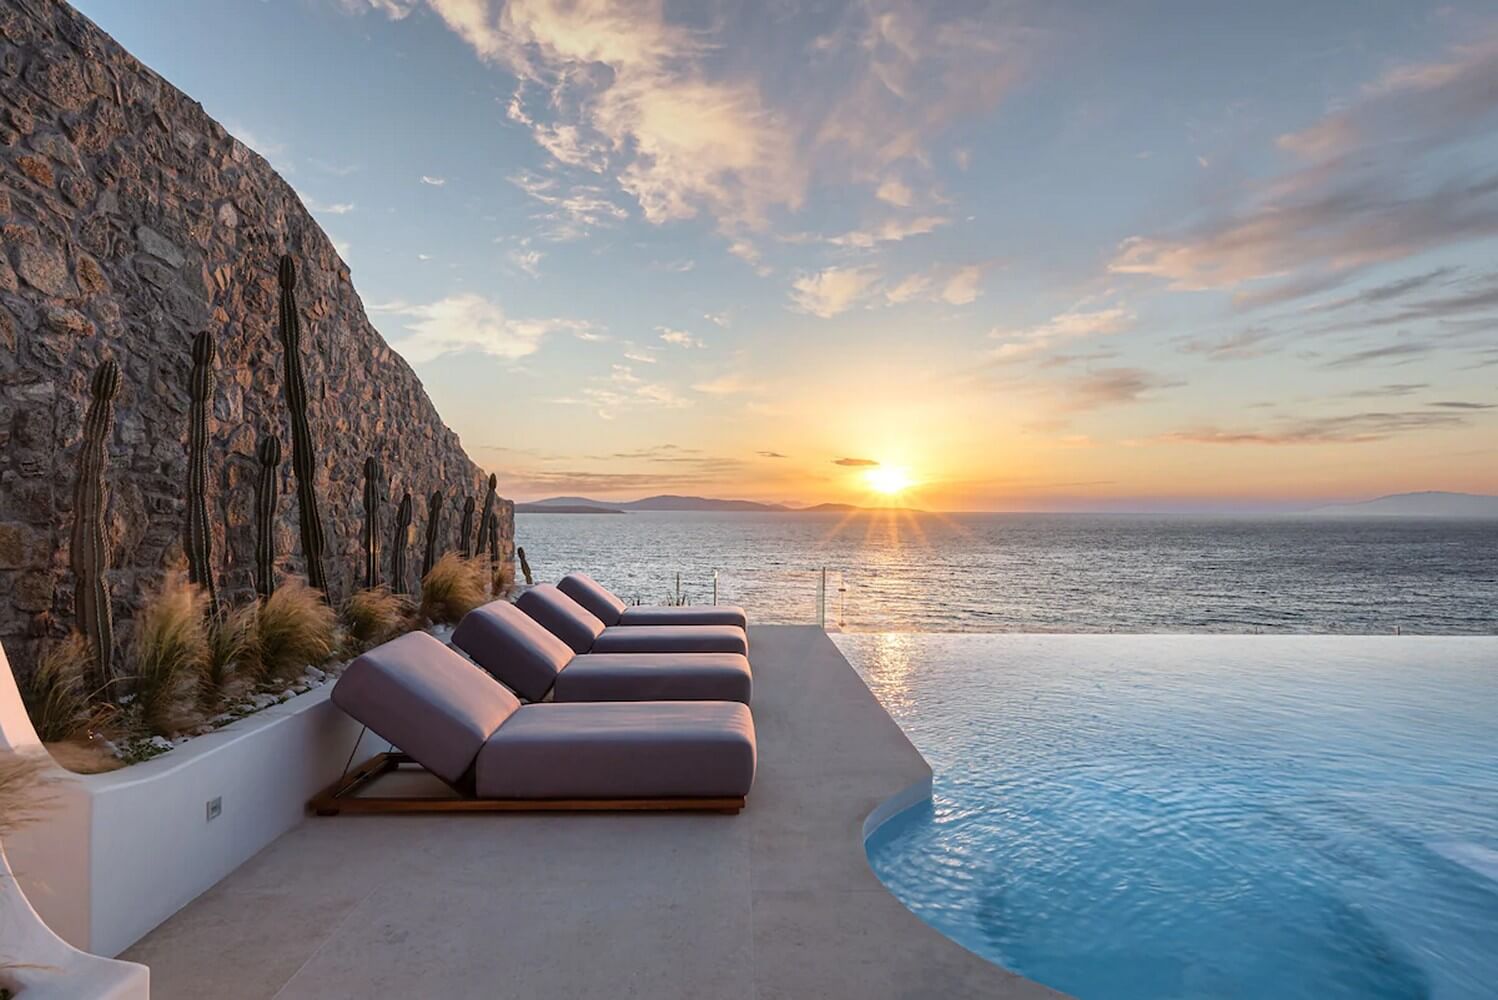 Infinity pool and sunbeds in a private Mykonos villa